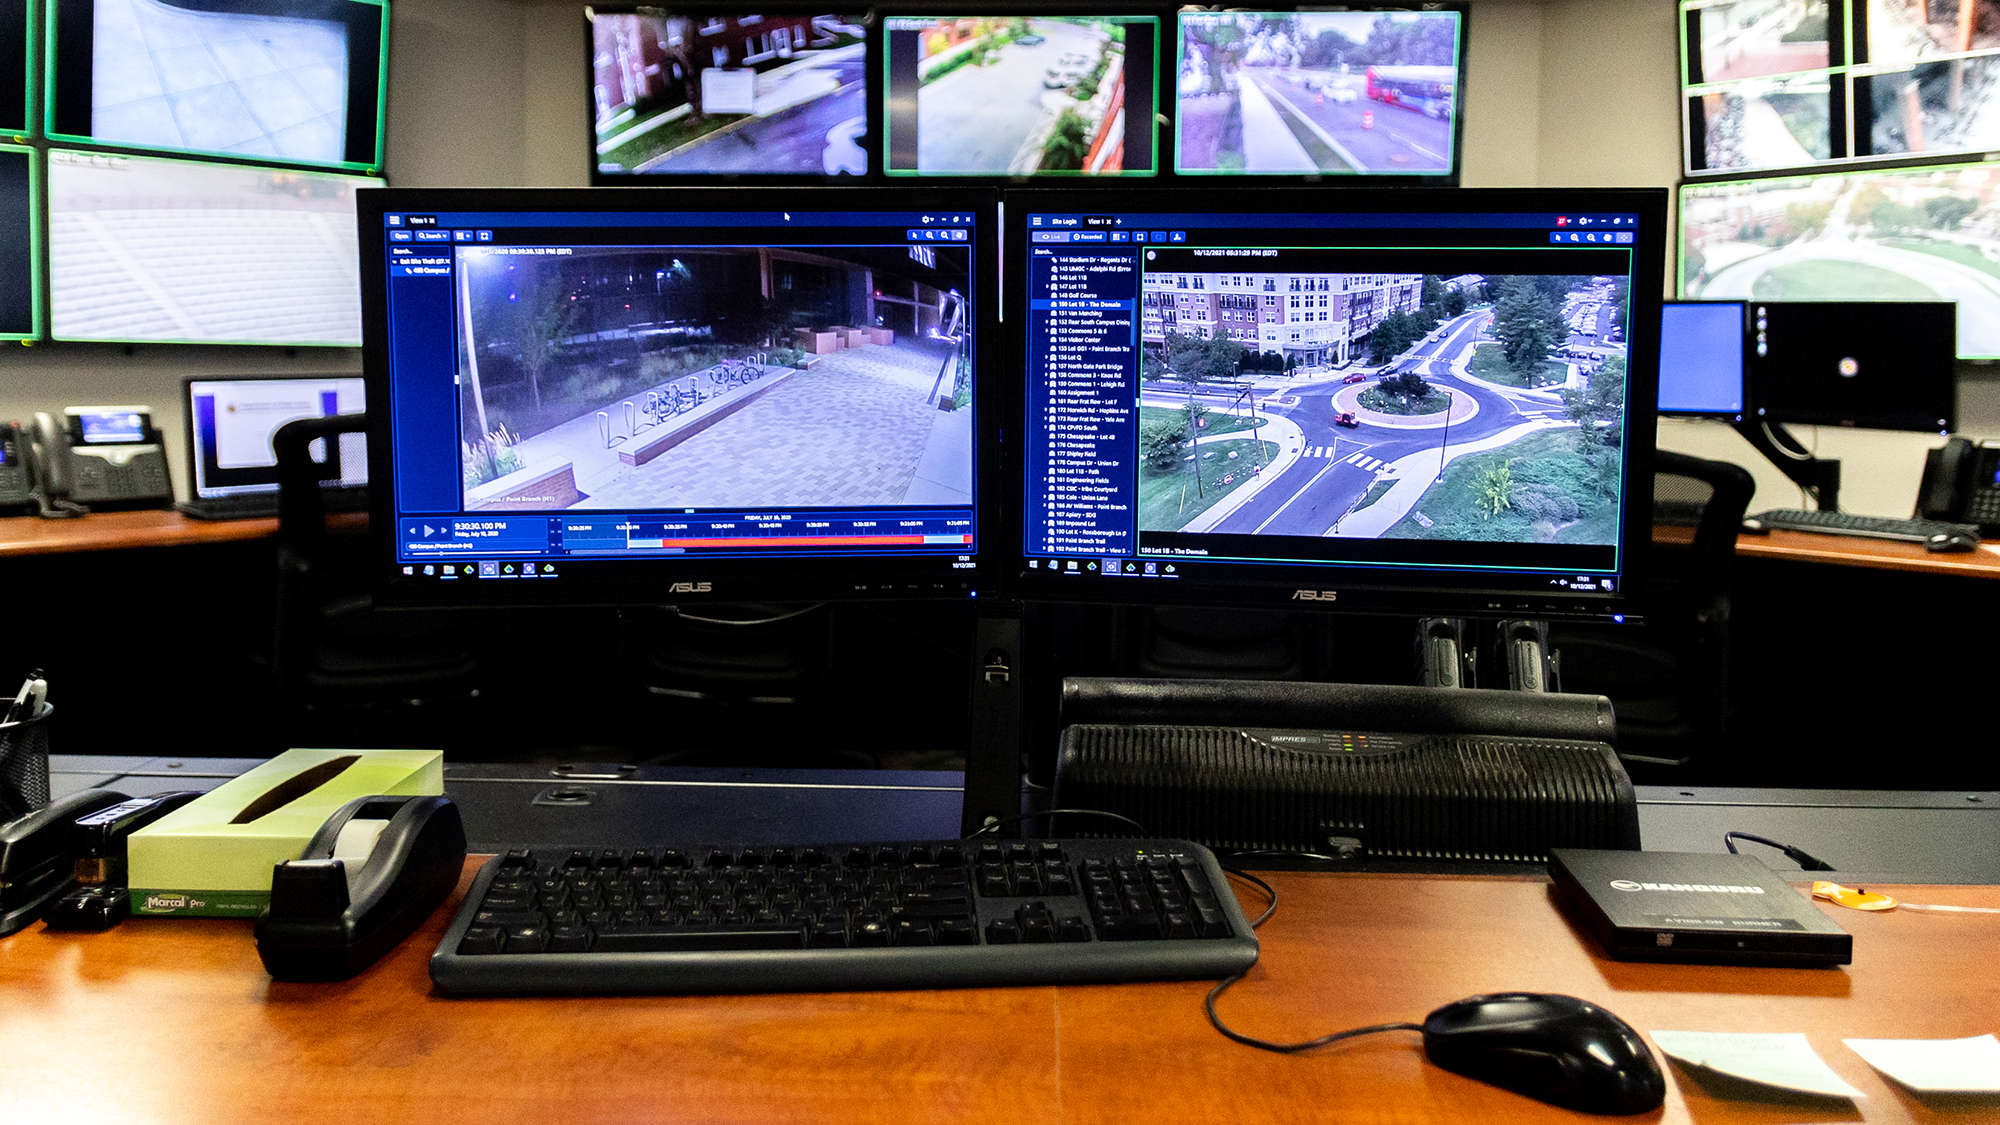 College Park funding cuts for live camera surveillance raises safety concerns